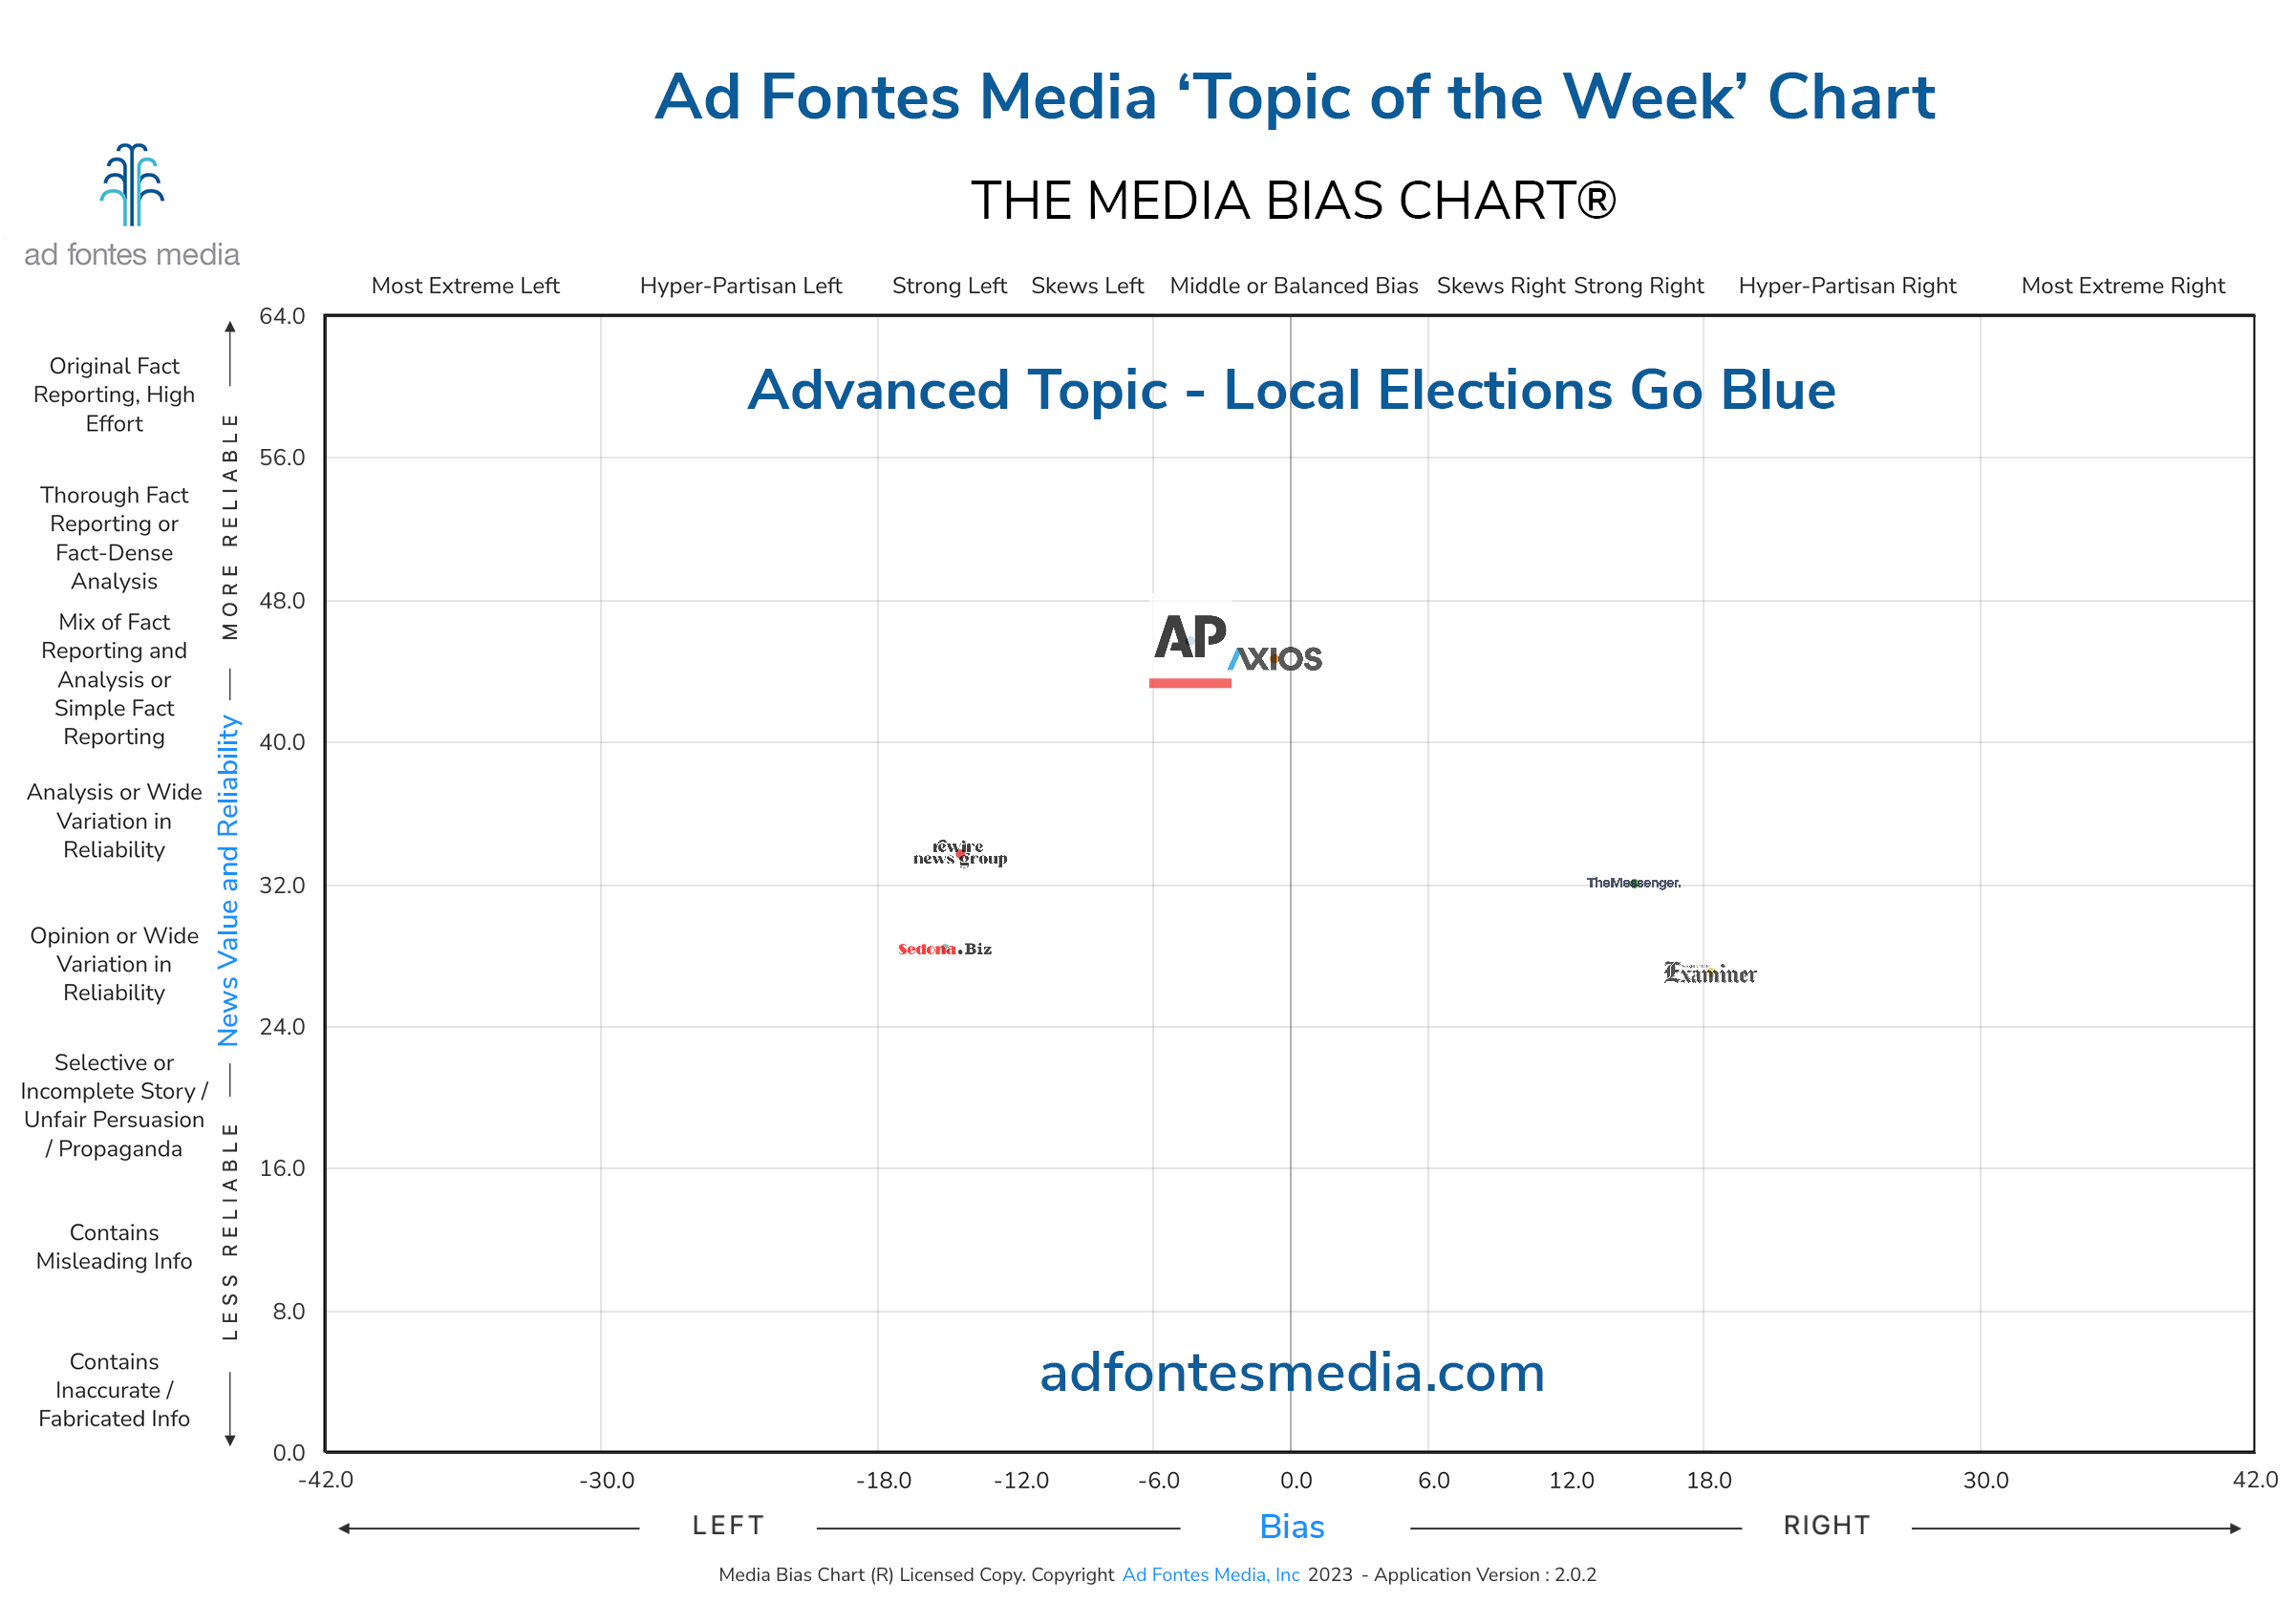 Media Bias Chart Explores News Coverage of Local Elections Going Blue